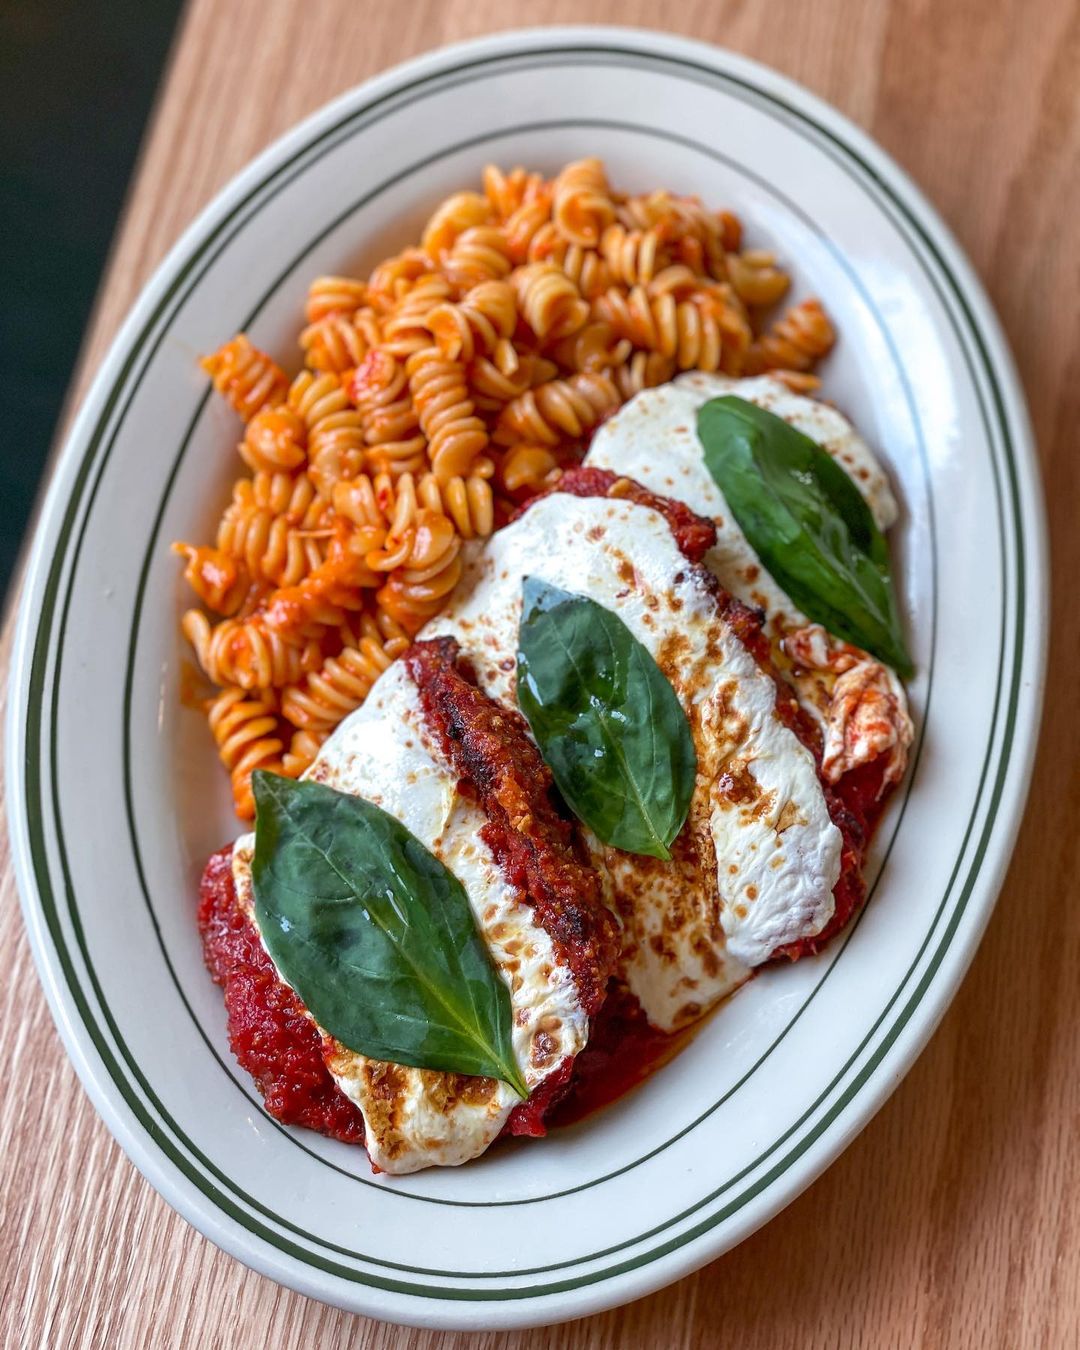 Overhead view of chicken parm on a white plate with a side of rotini. The plate is on a light wooden surface.